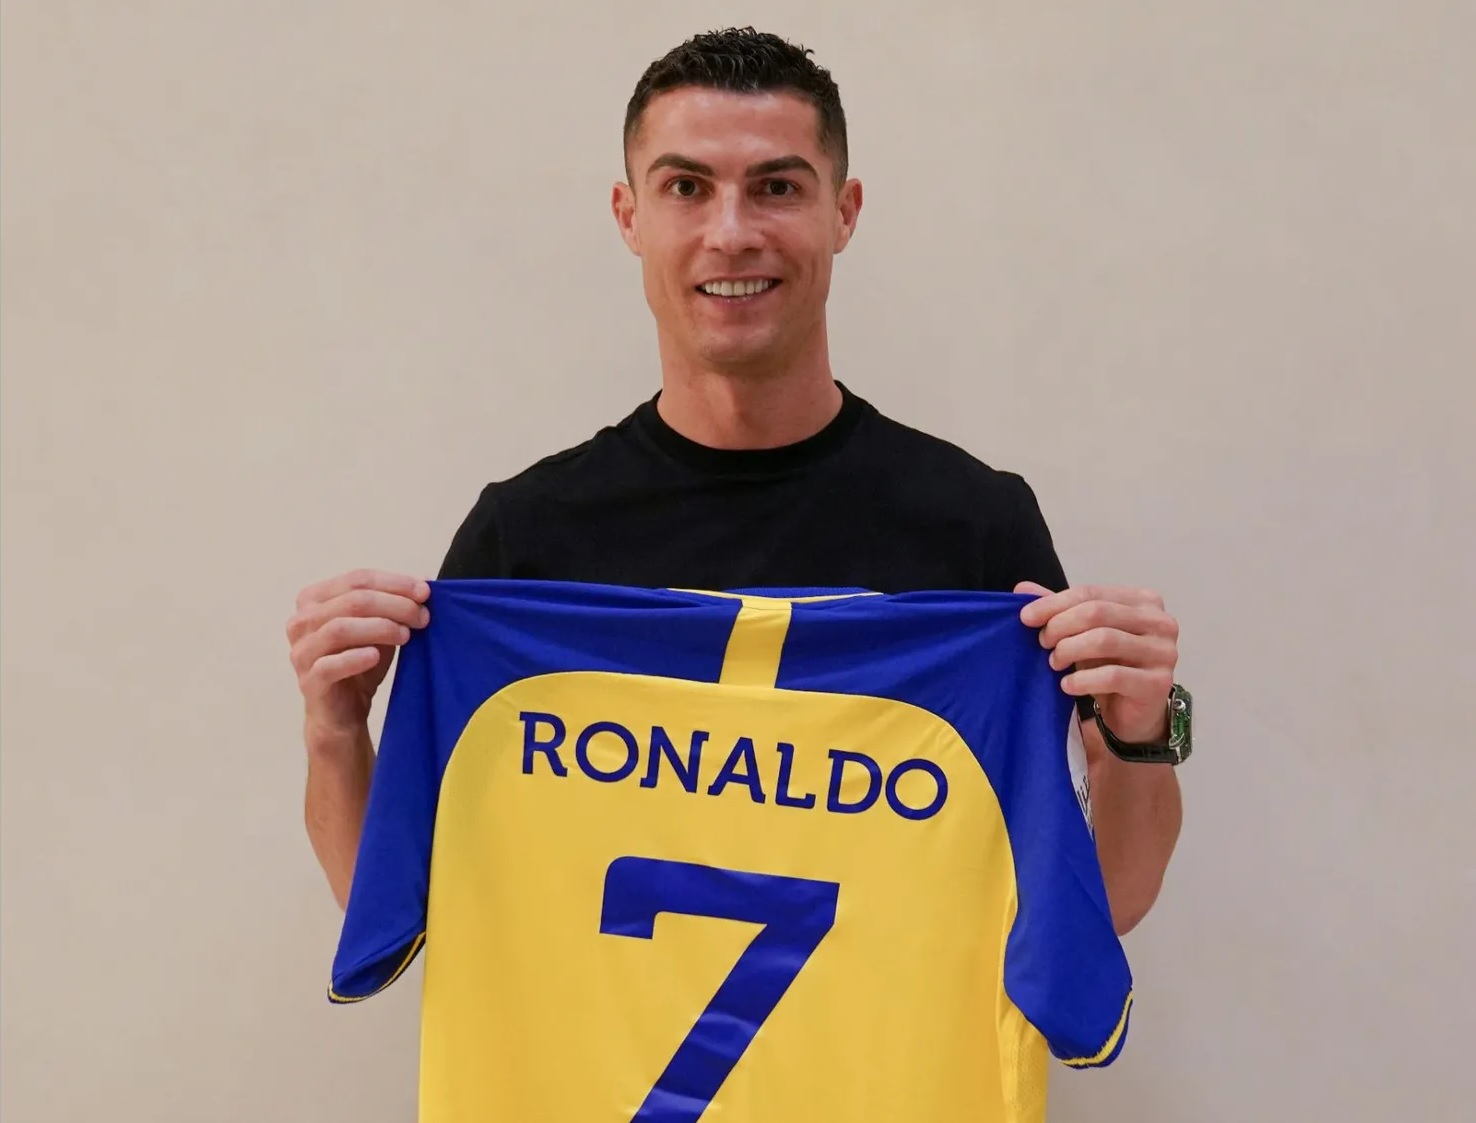 The Saudi victory gains from the “world’s highest paid” Ronaldo deal